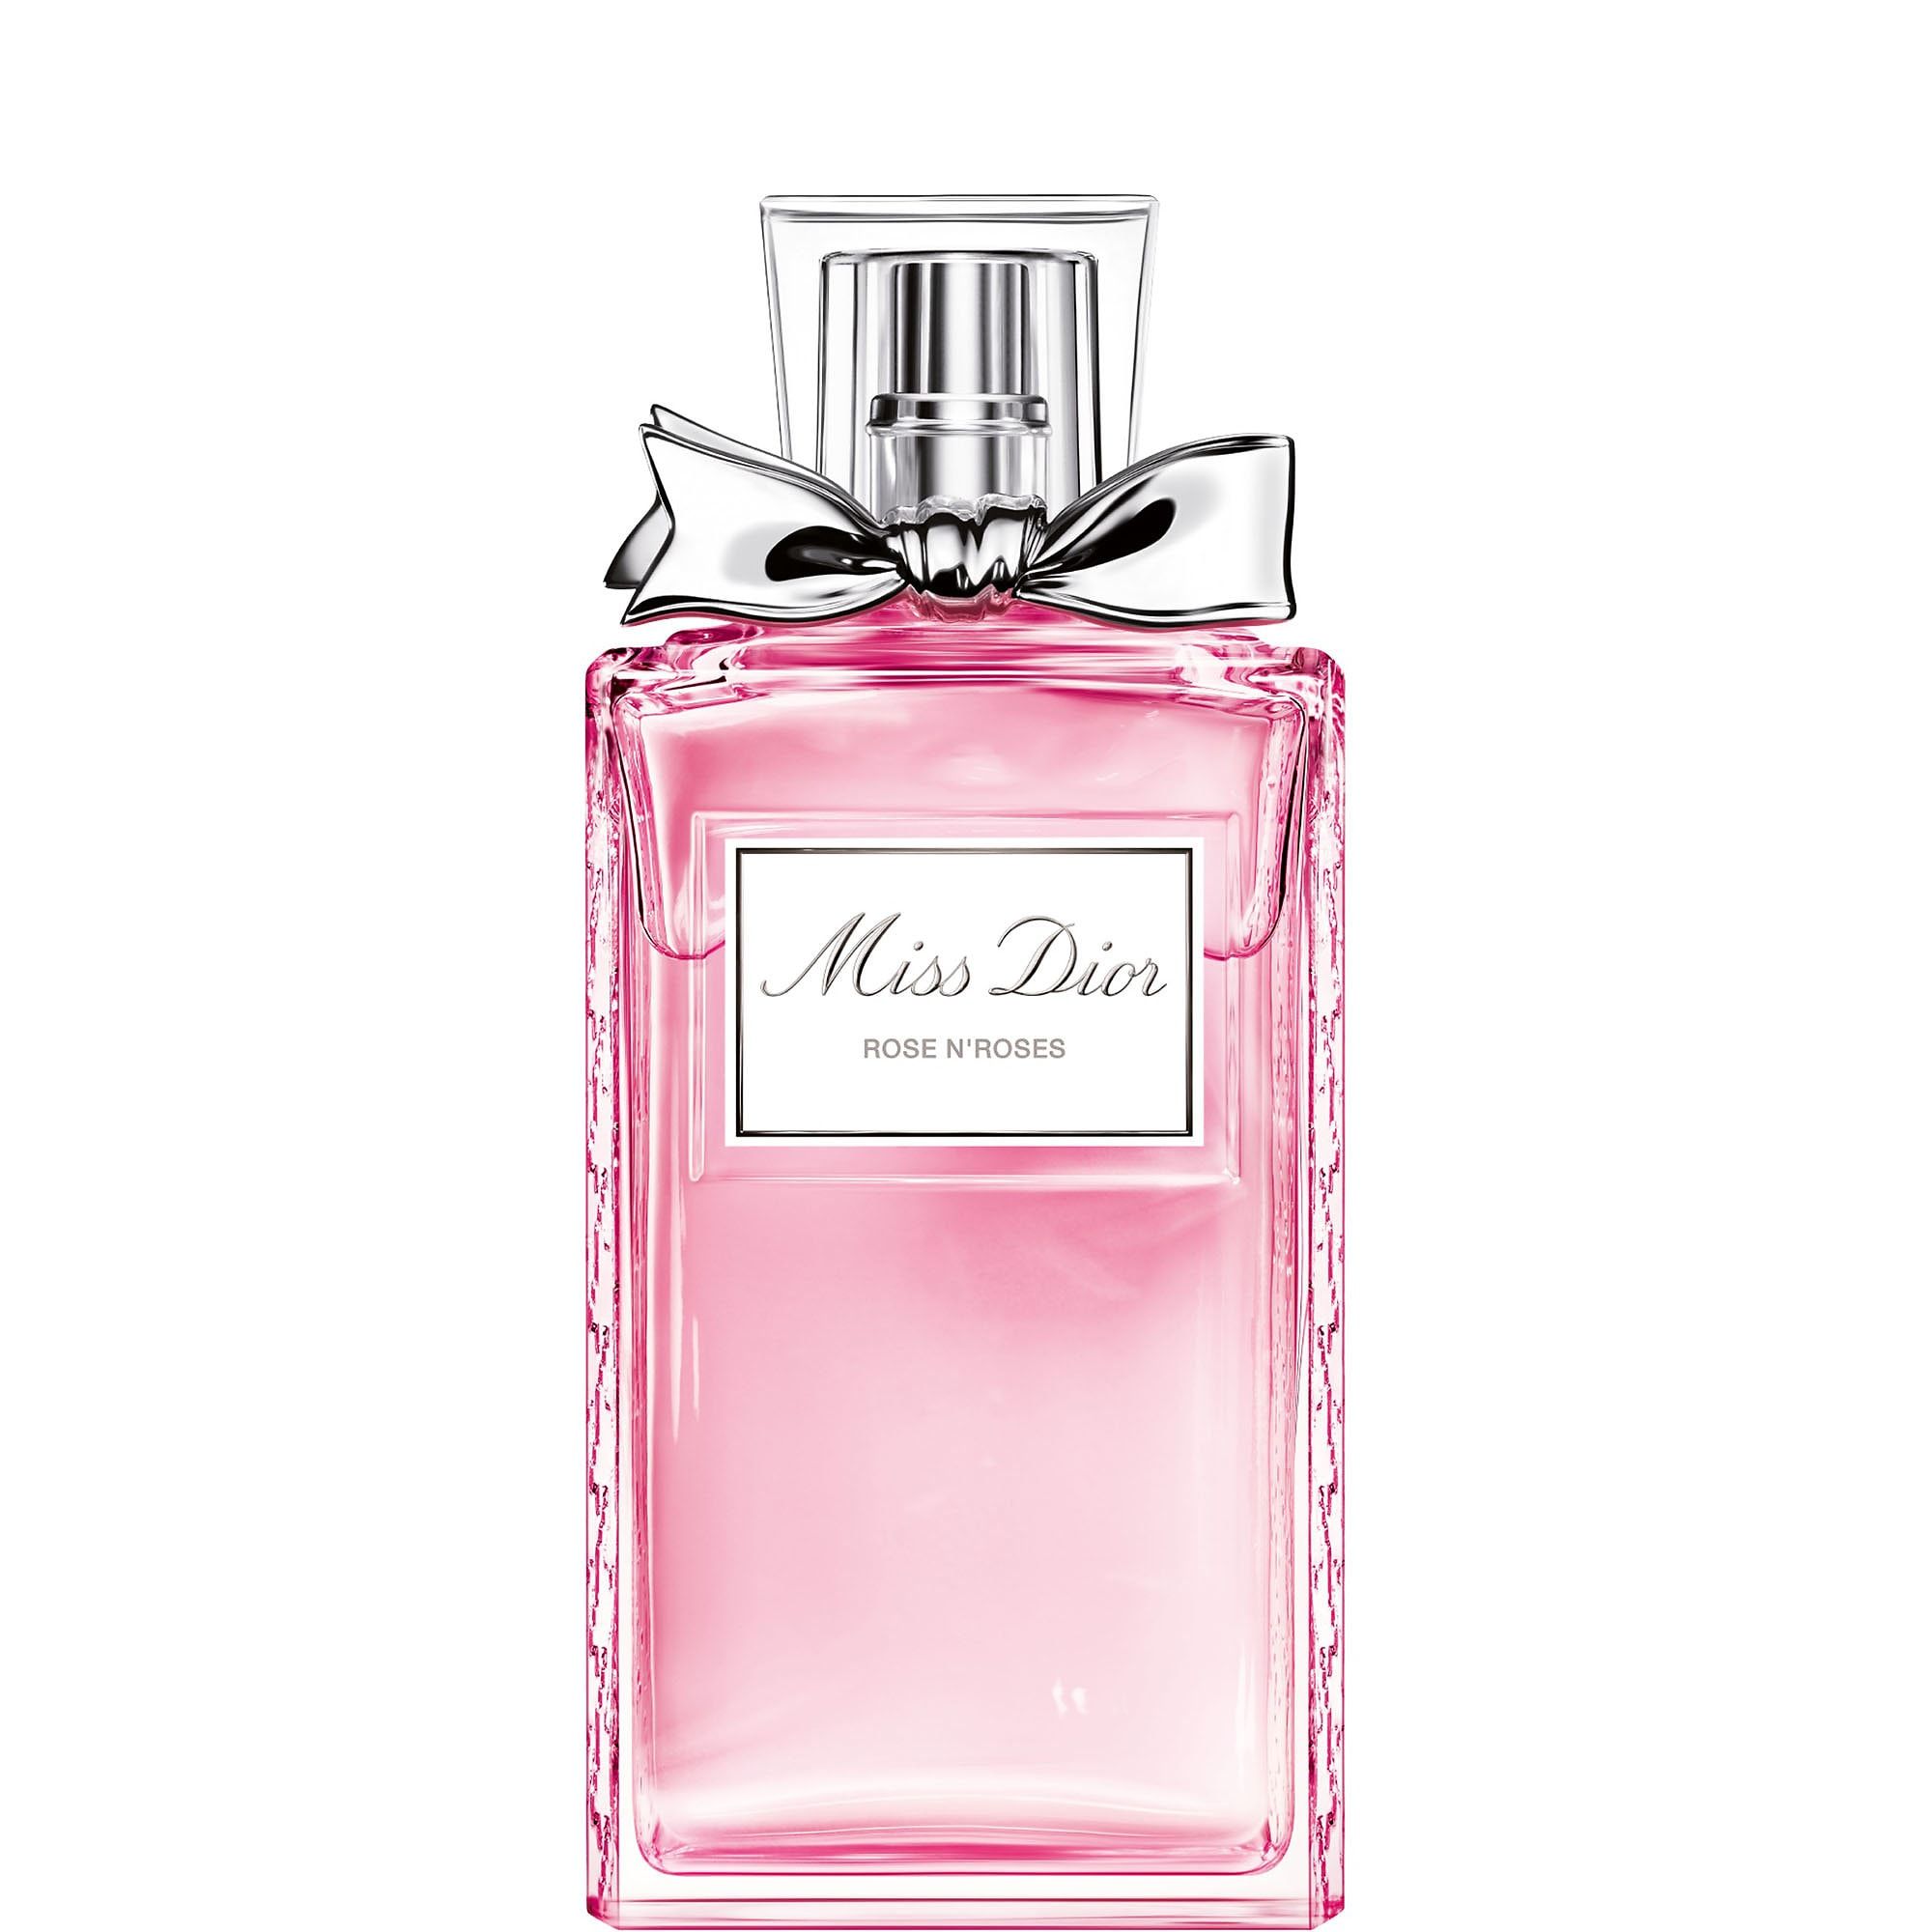 Floral Perfumes and Scents